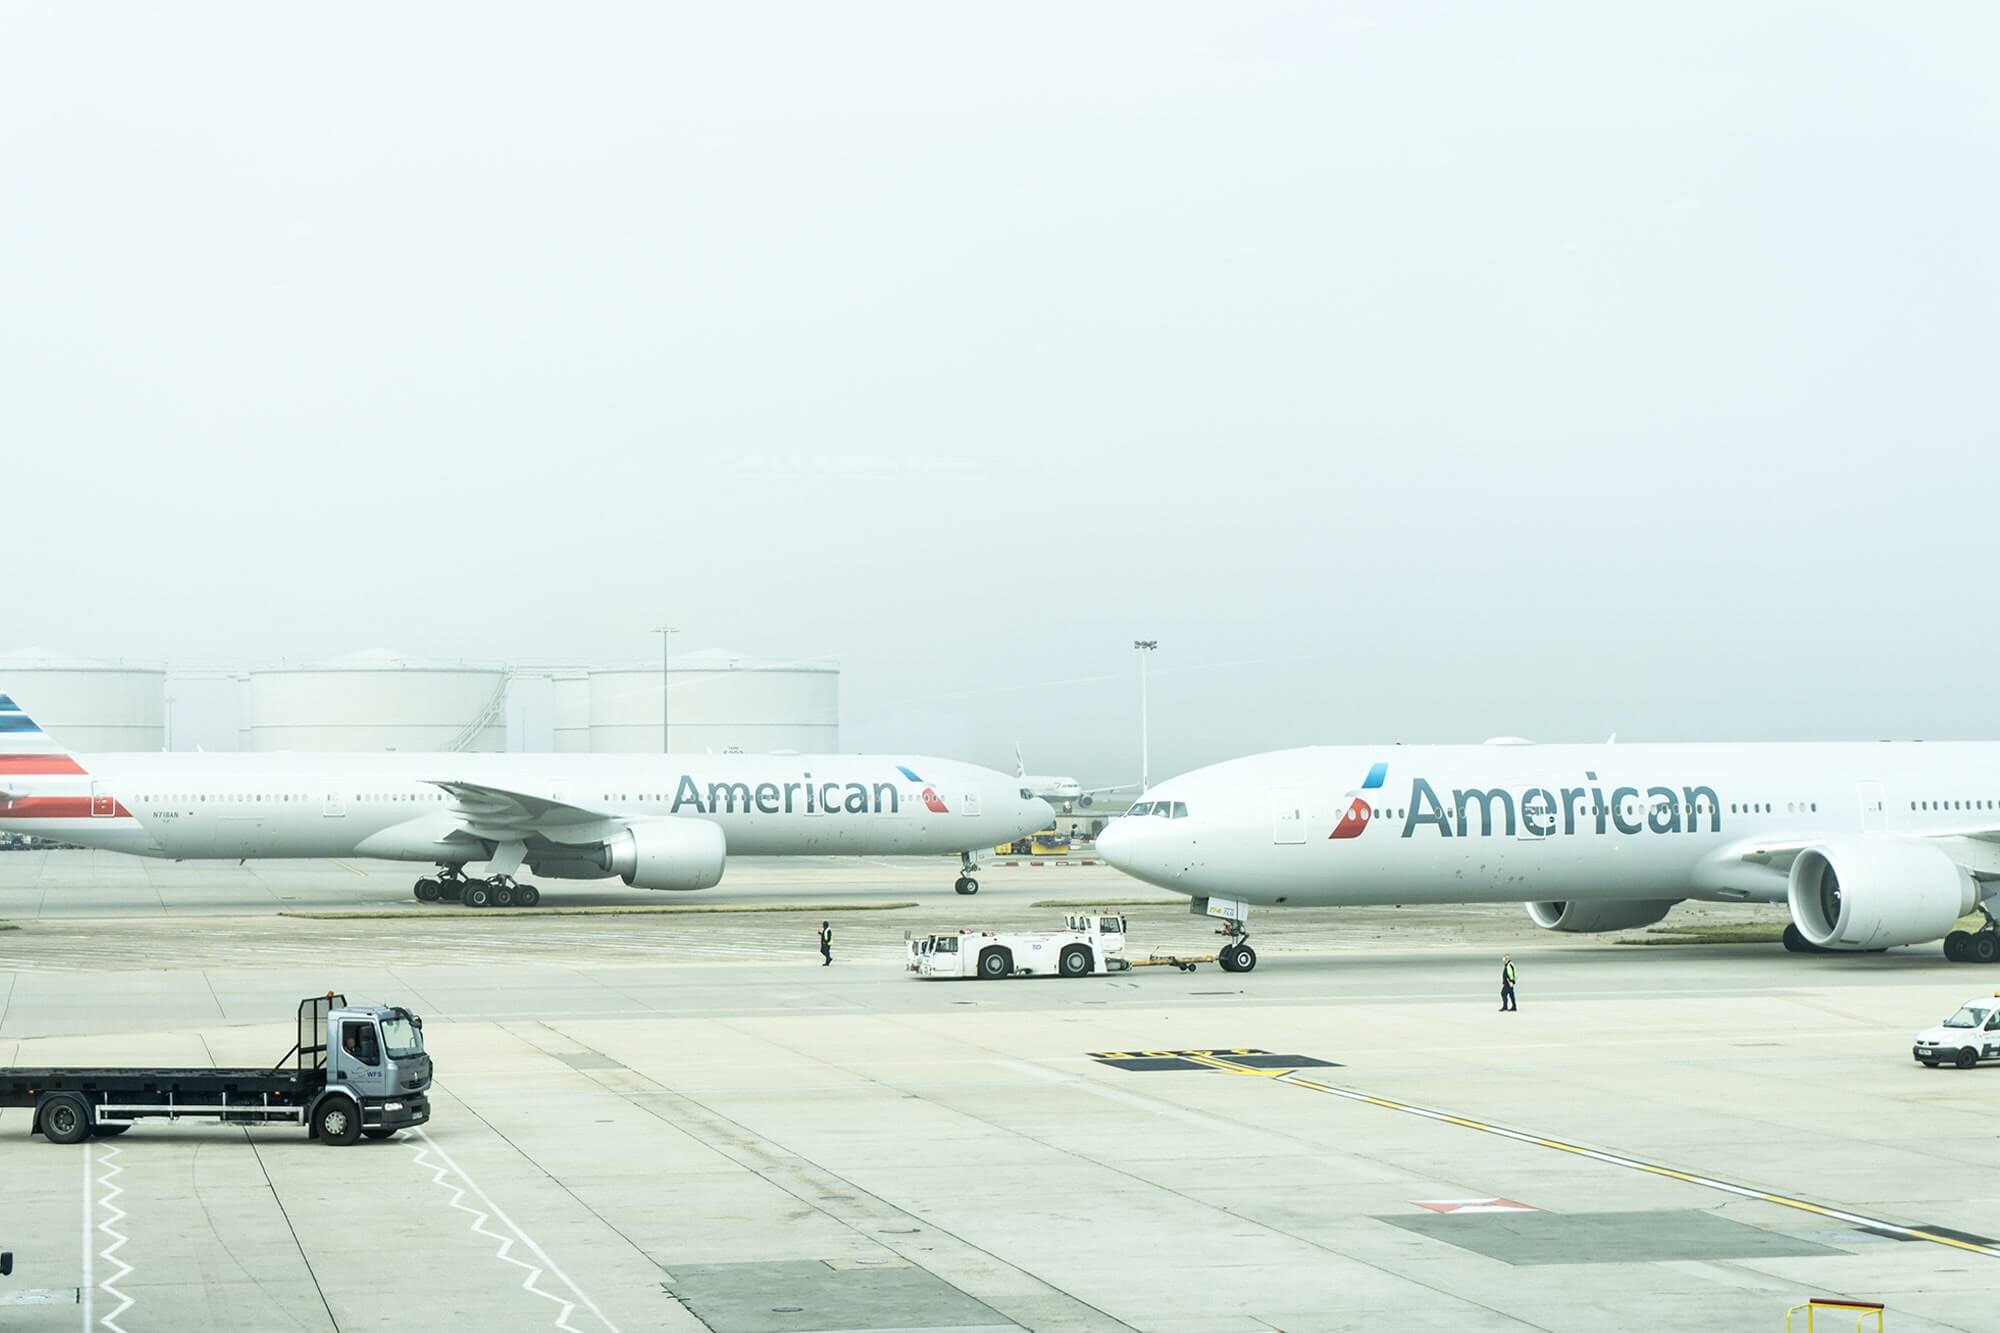 American Airlines planes taxing